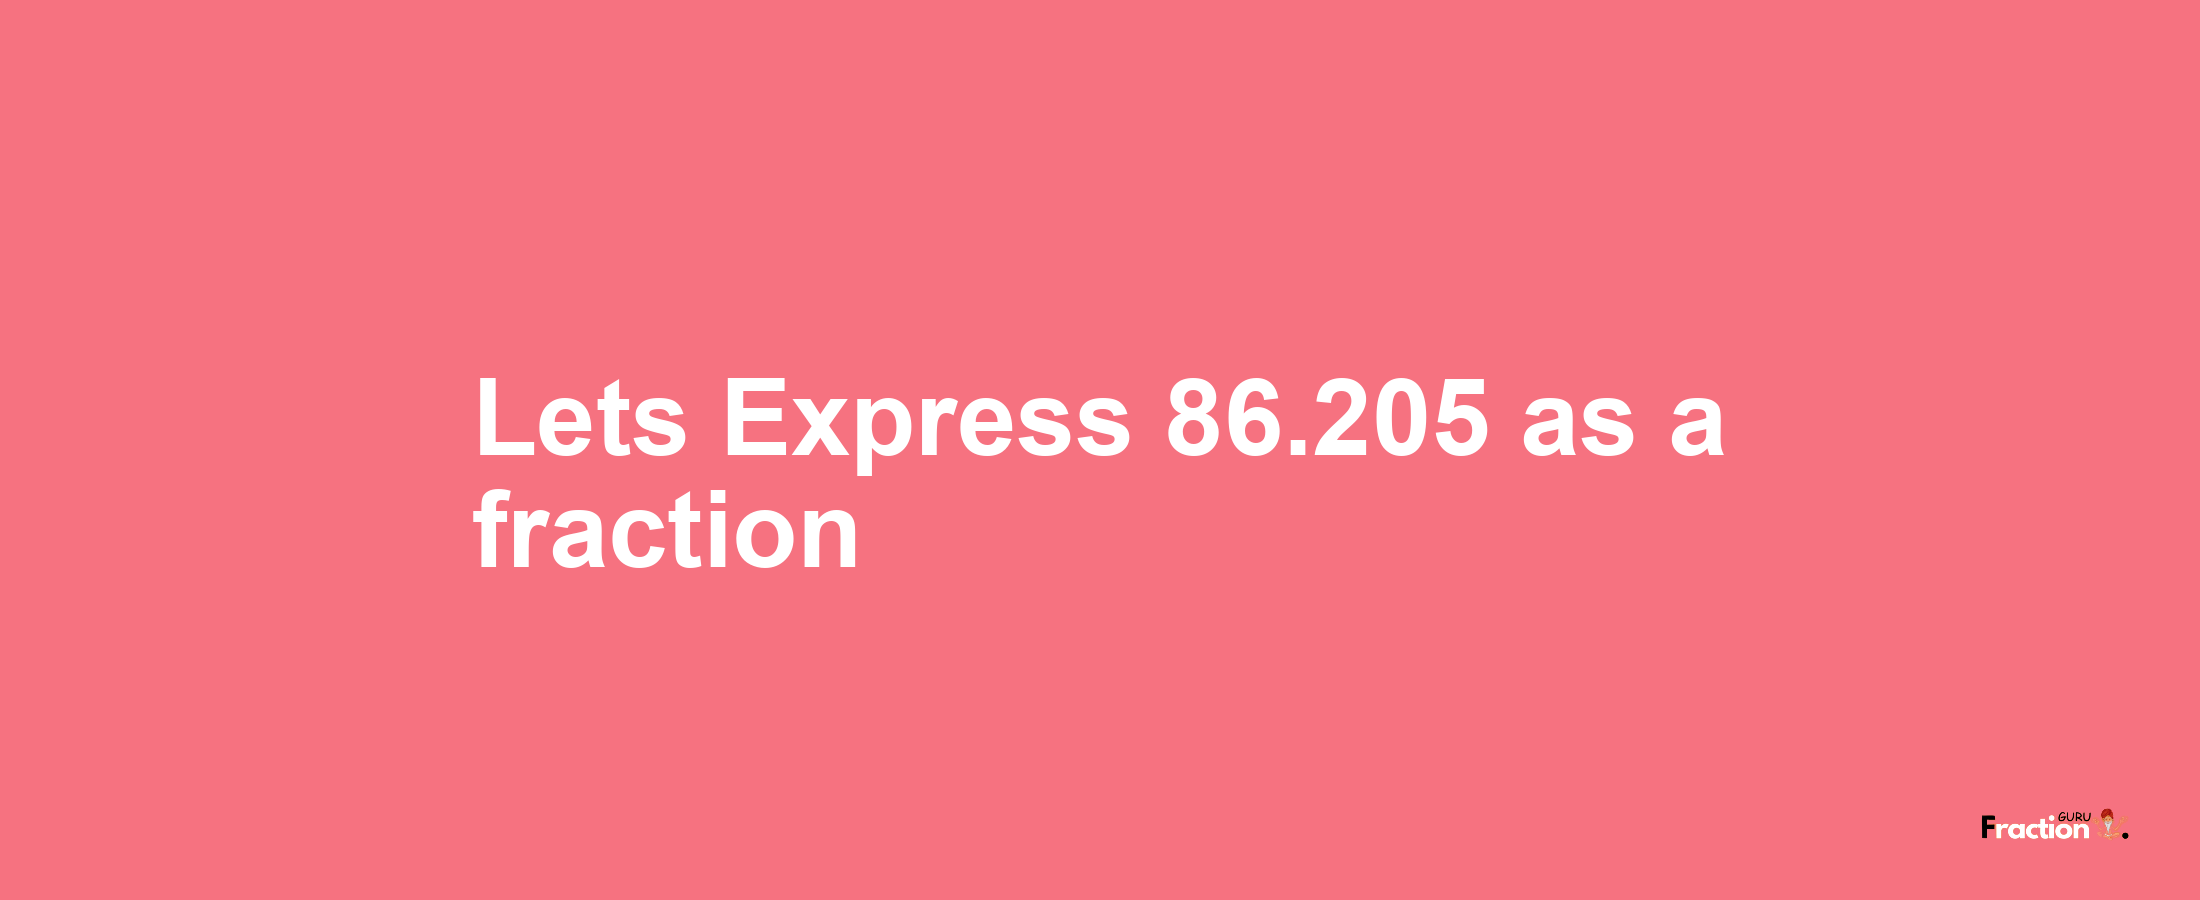 Lets Express 86.205 as afraction